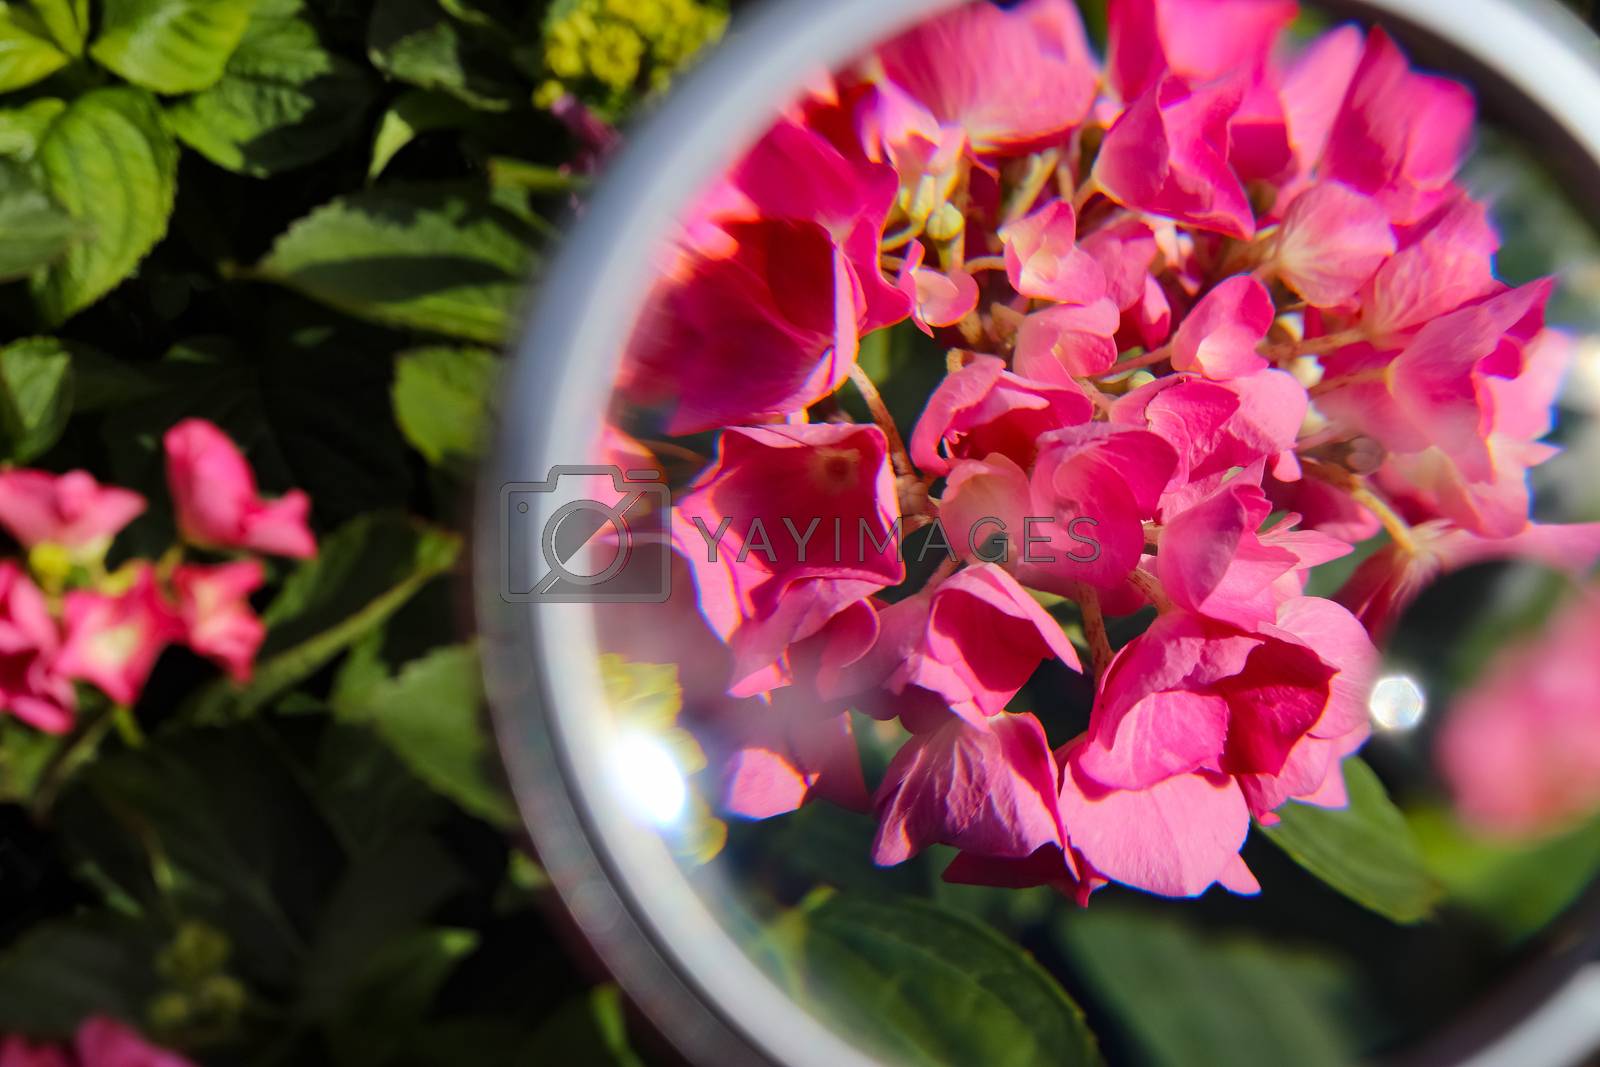 Royalty free image of Beautiful and colorful flowers zoomed at with a magnifying glass by MP_foto71